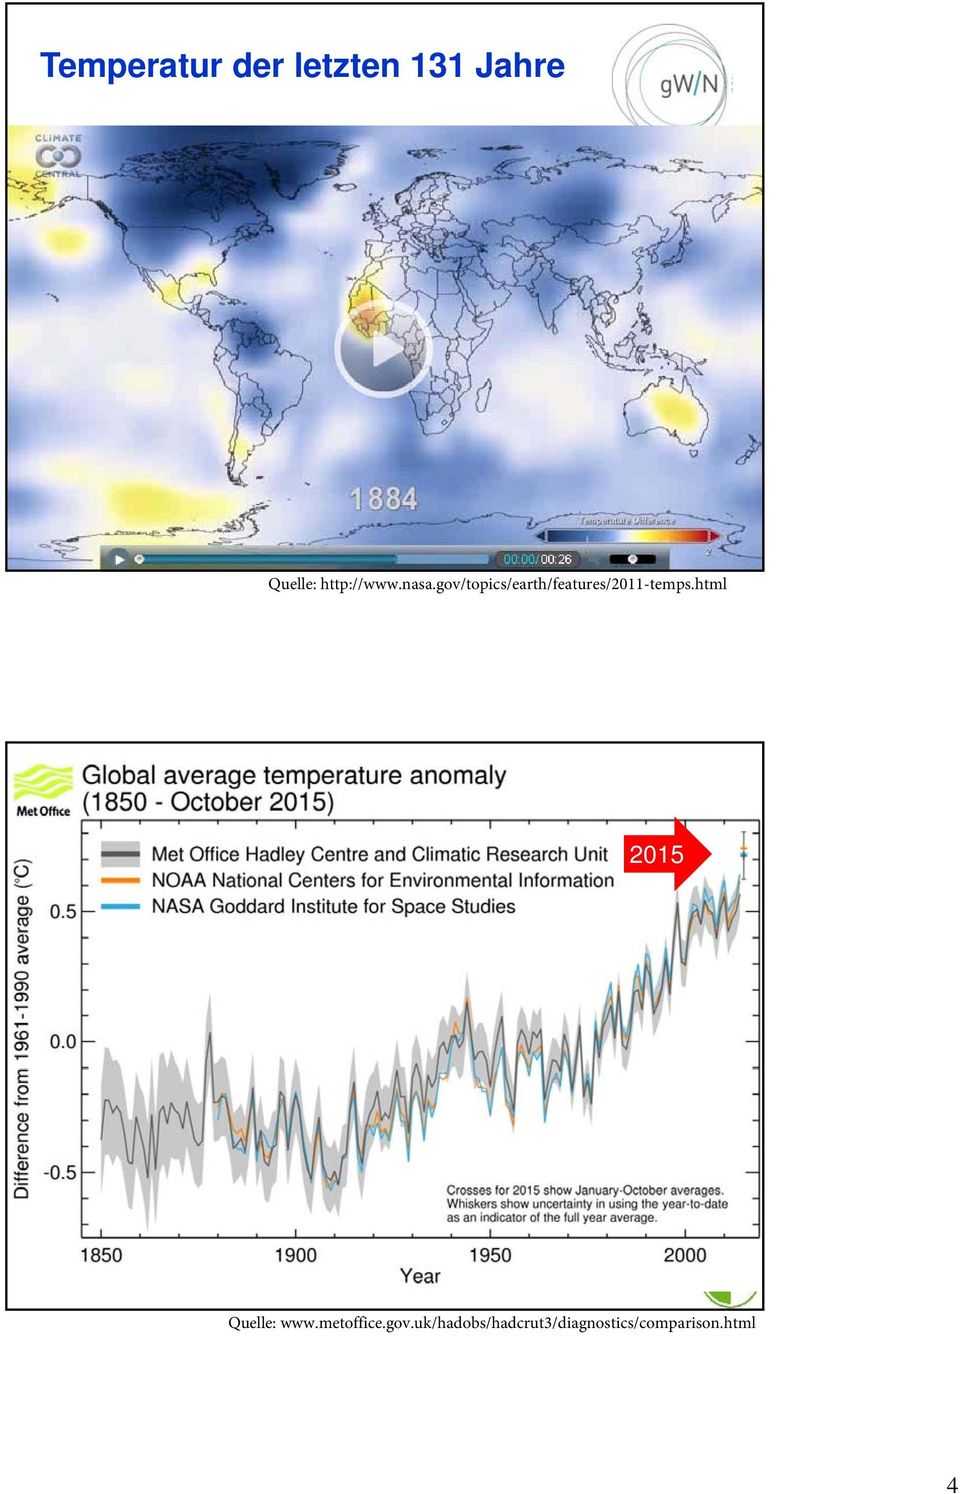 http://www.nasa.gov/topics/earth/features/2011-temps.